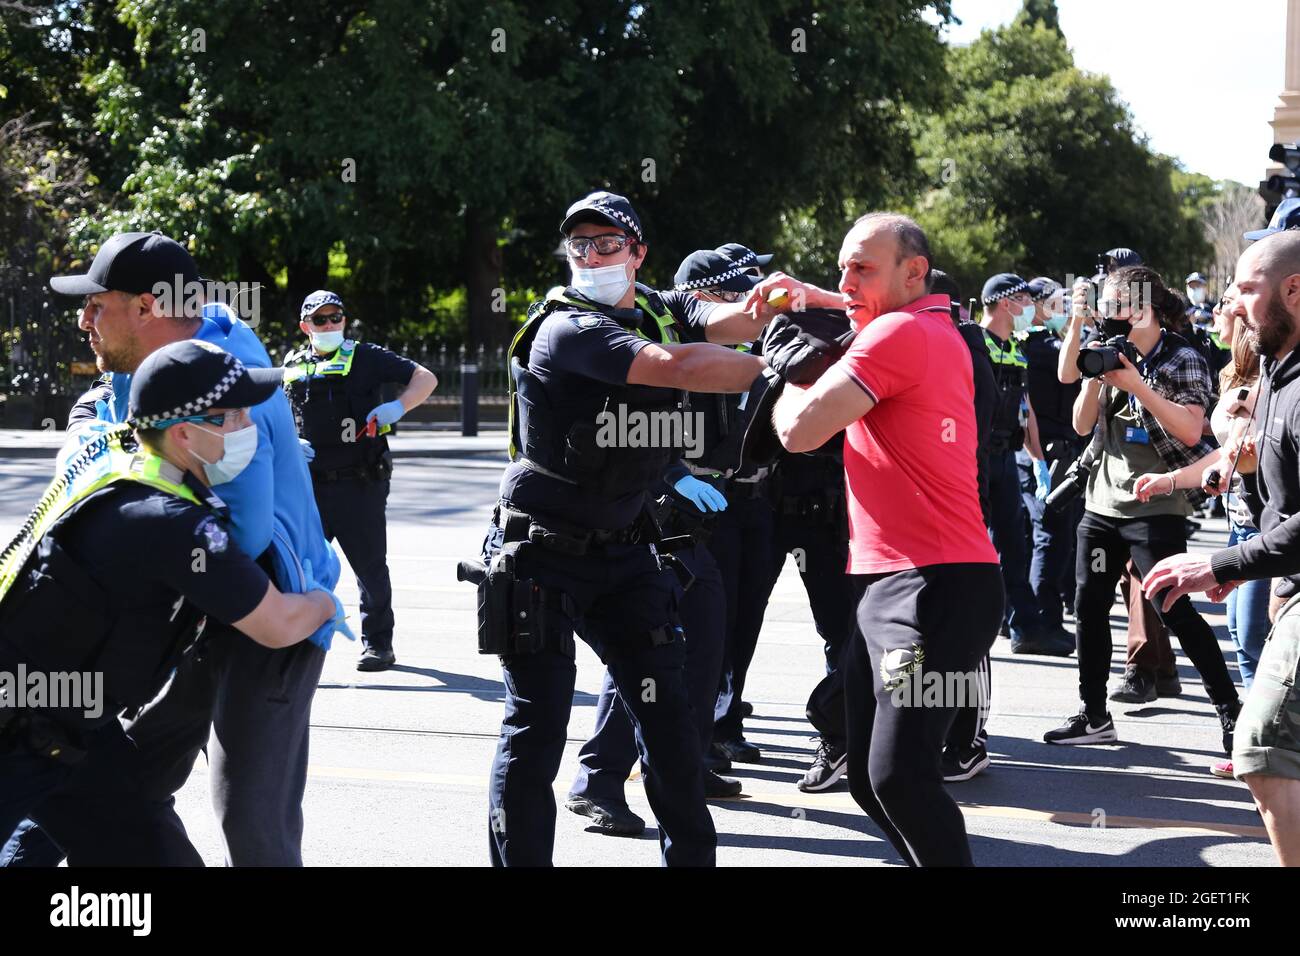 Melbourne, Australia, 21 August, 2021. Protesters clash with police during the Freedom protest on August 21, 2021 in Melbourne, Australia. Freedom protests are being held around the country in response to the governments COVID-19 restrictions and continuing removal of liberties.  Credit: Dave Hewison/Speed Media/Alamy Live News Stock Photo